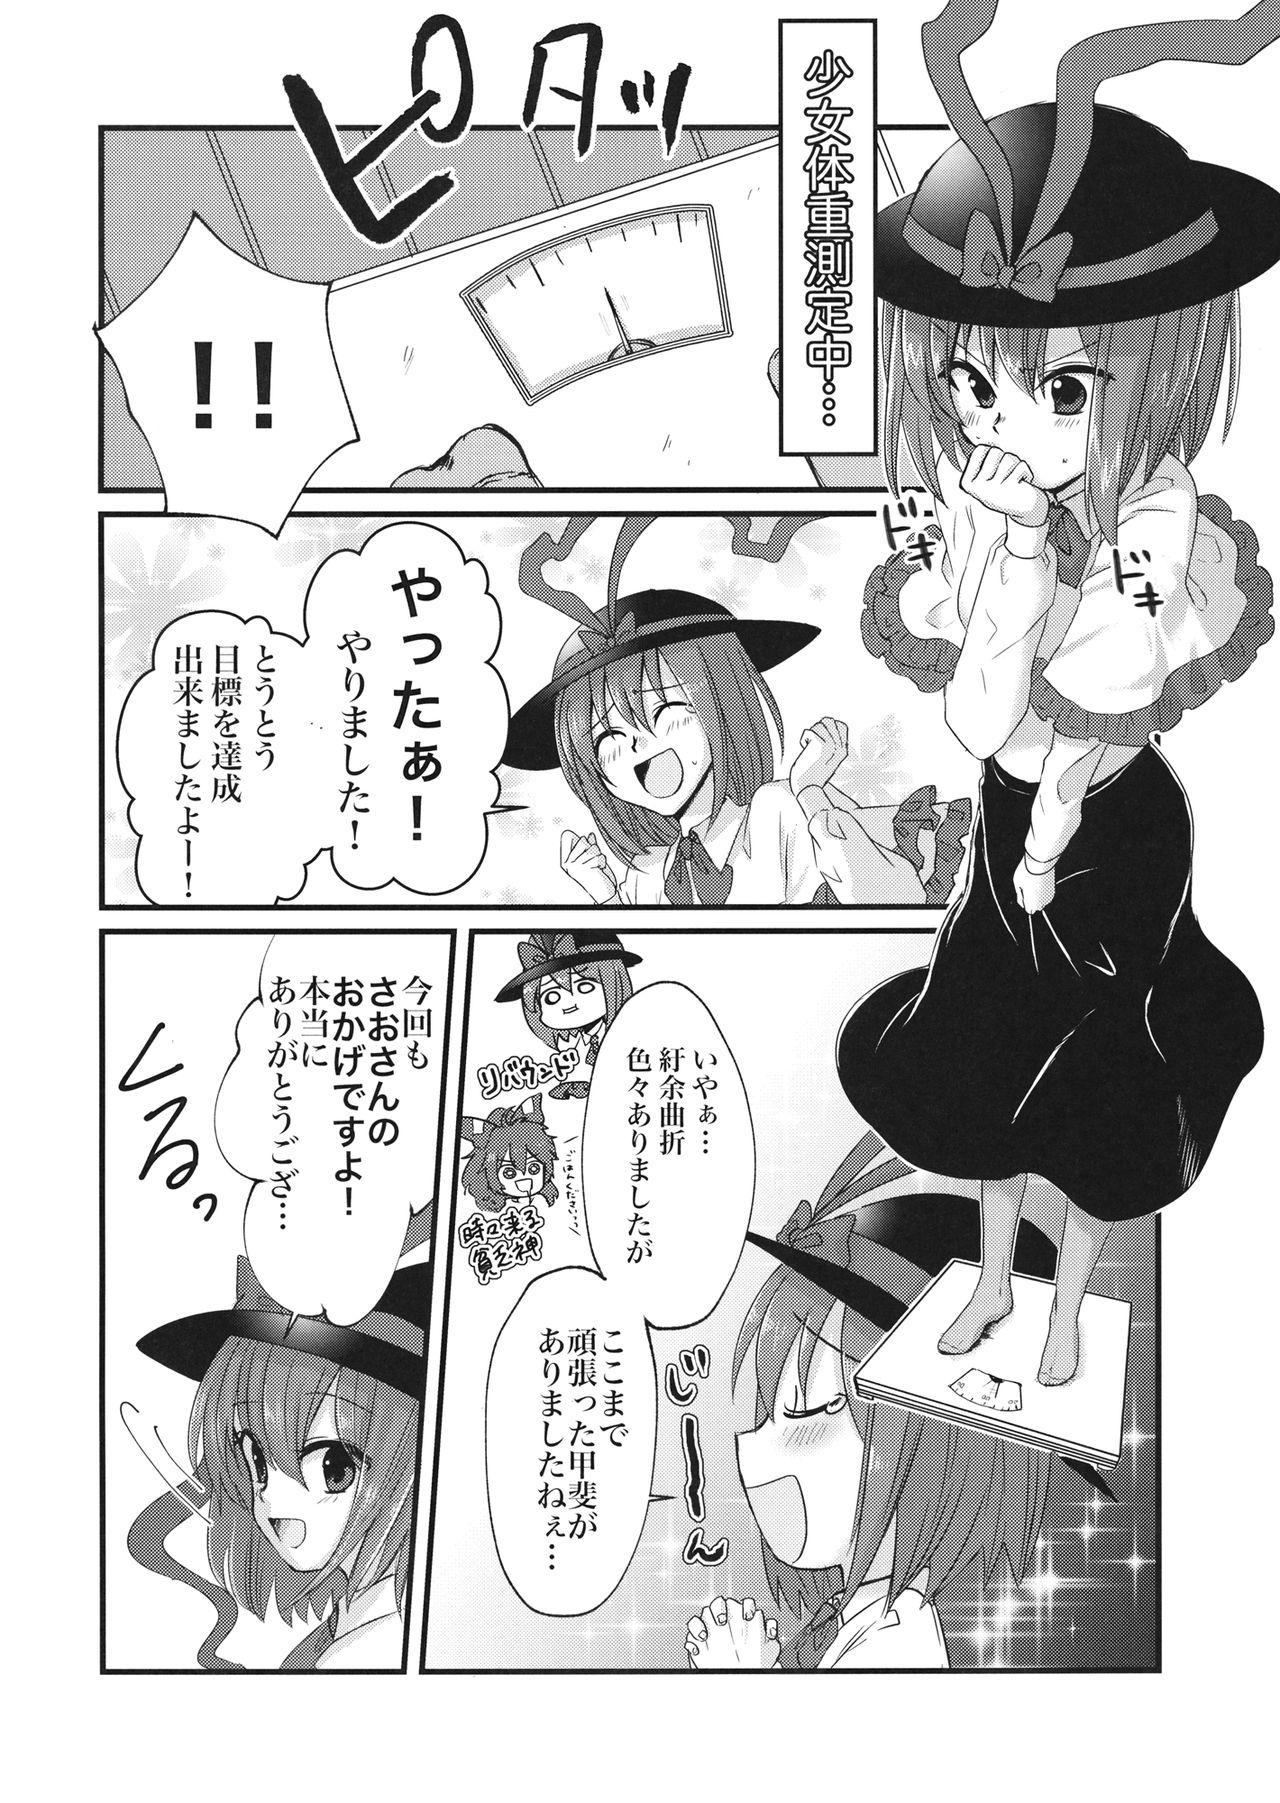 Private 衣玖さんと一緒に色々頑張る本 - Touhou project Facial - Page 3